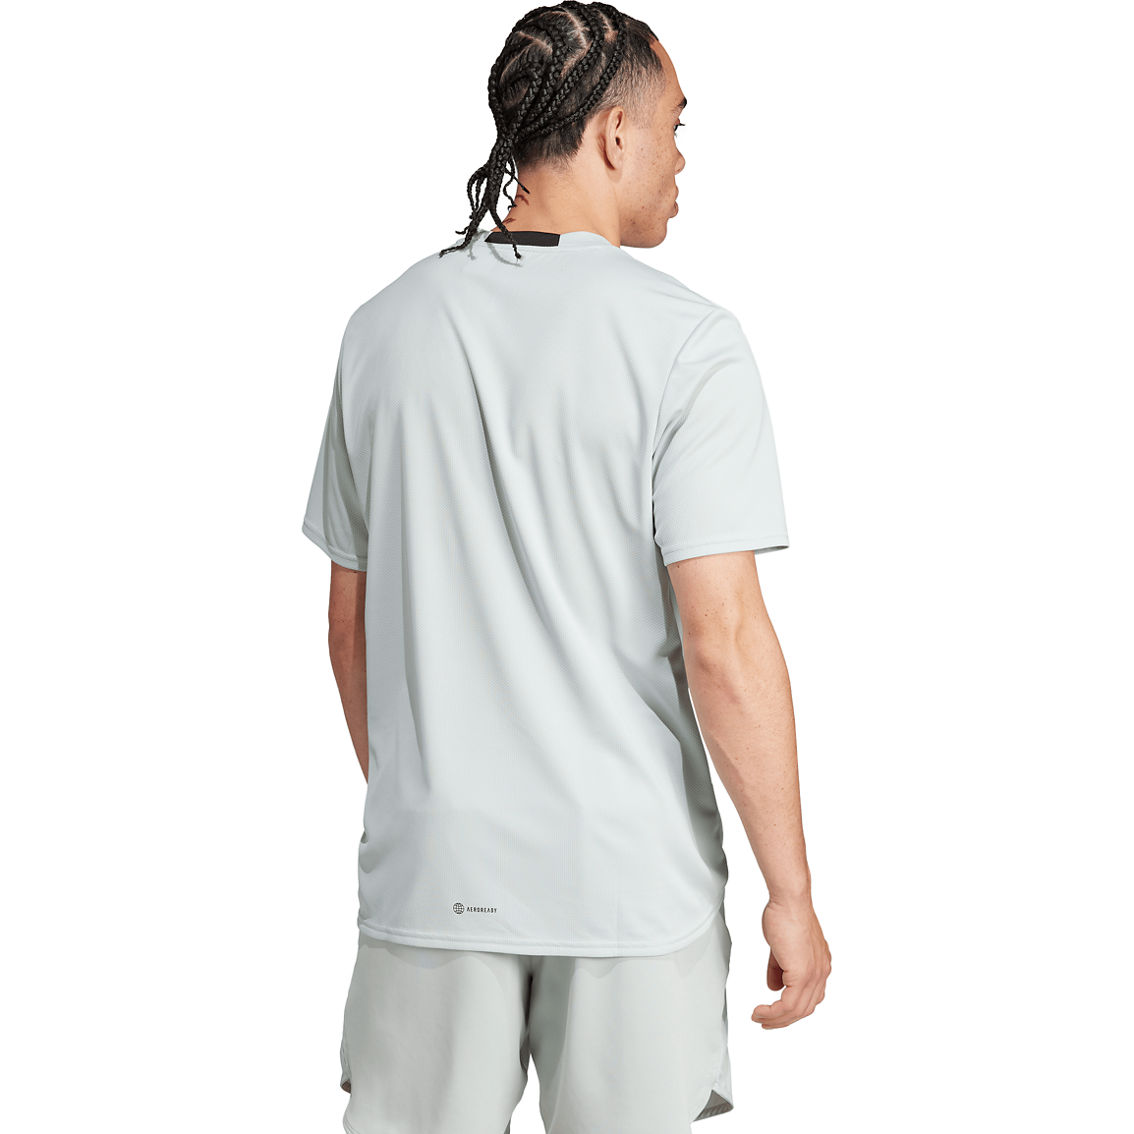 adidas Designed for Movement Tee - Image 2 of 6